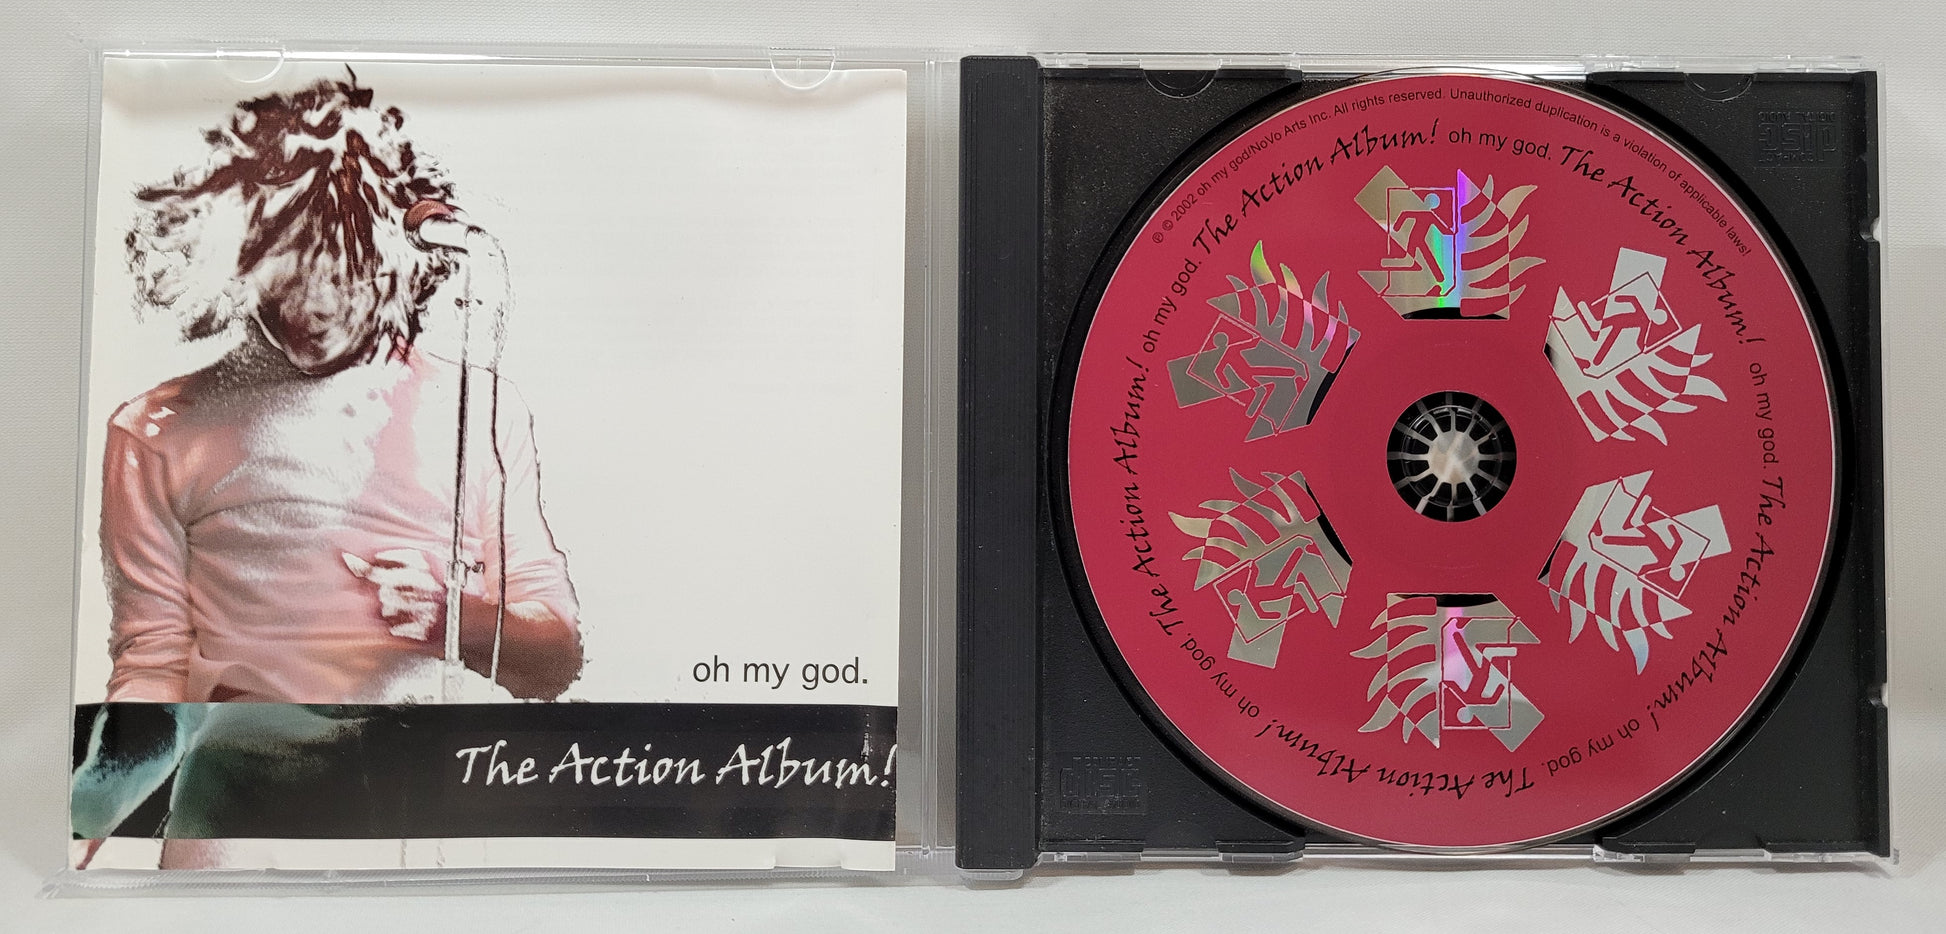 Oh My God - The Action Album! [2002 Used CD]